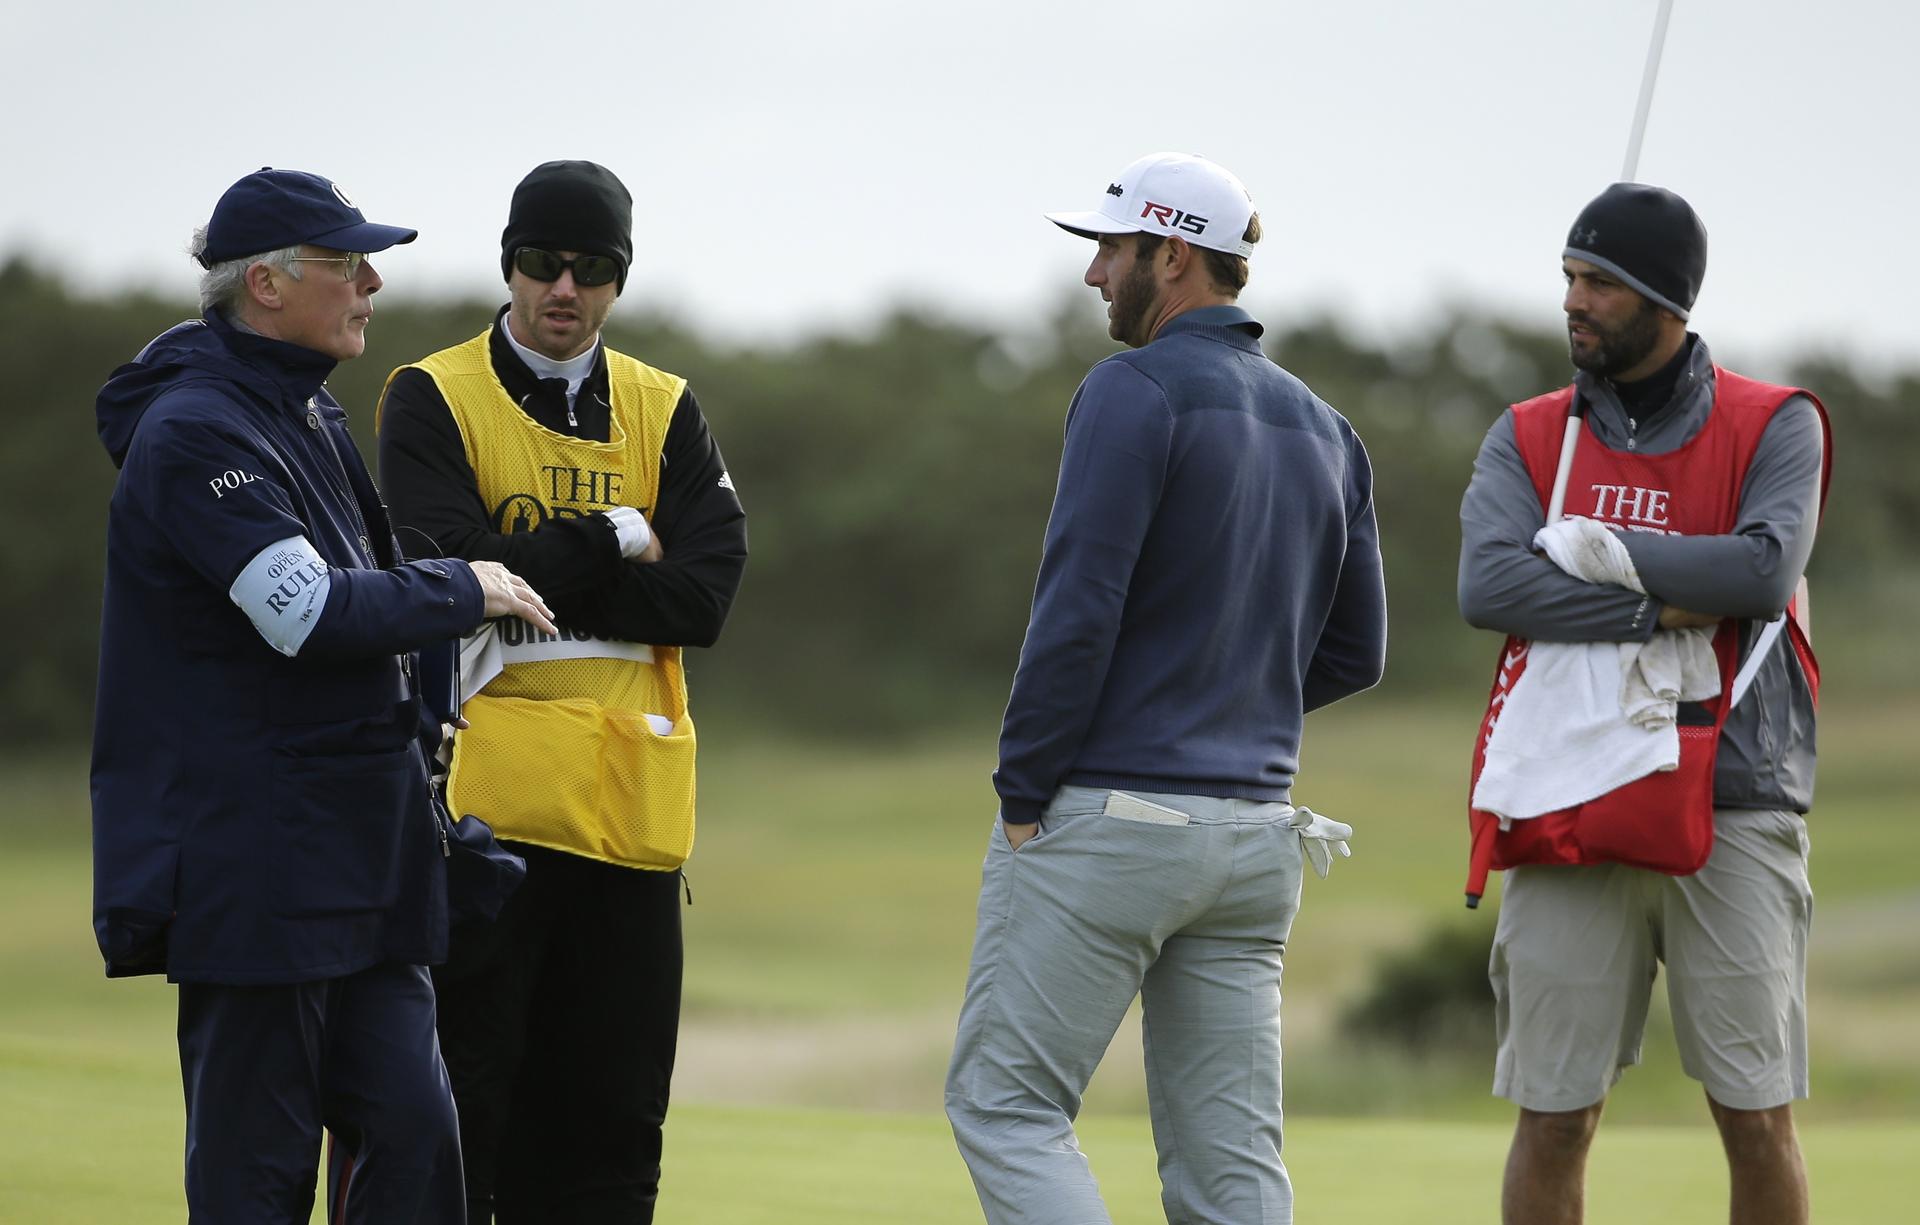 Dustin Johnson speaks with officials as play is suspended.Photo: AP